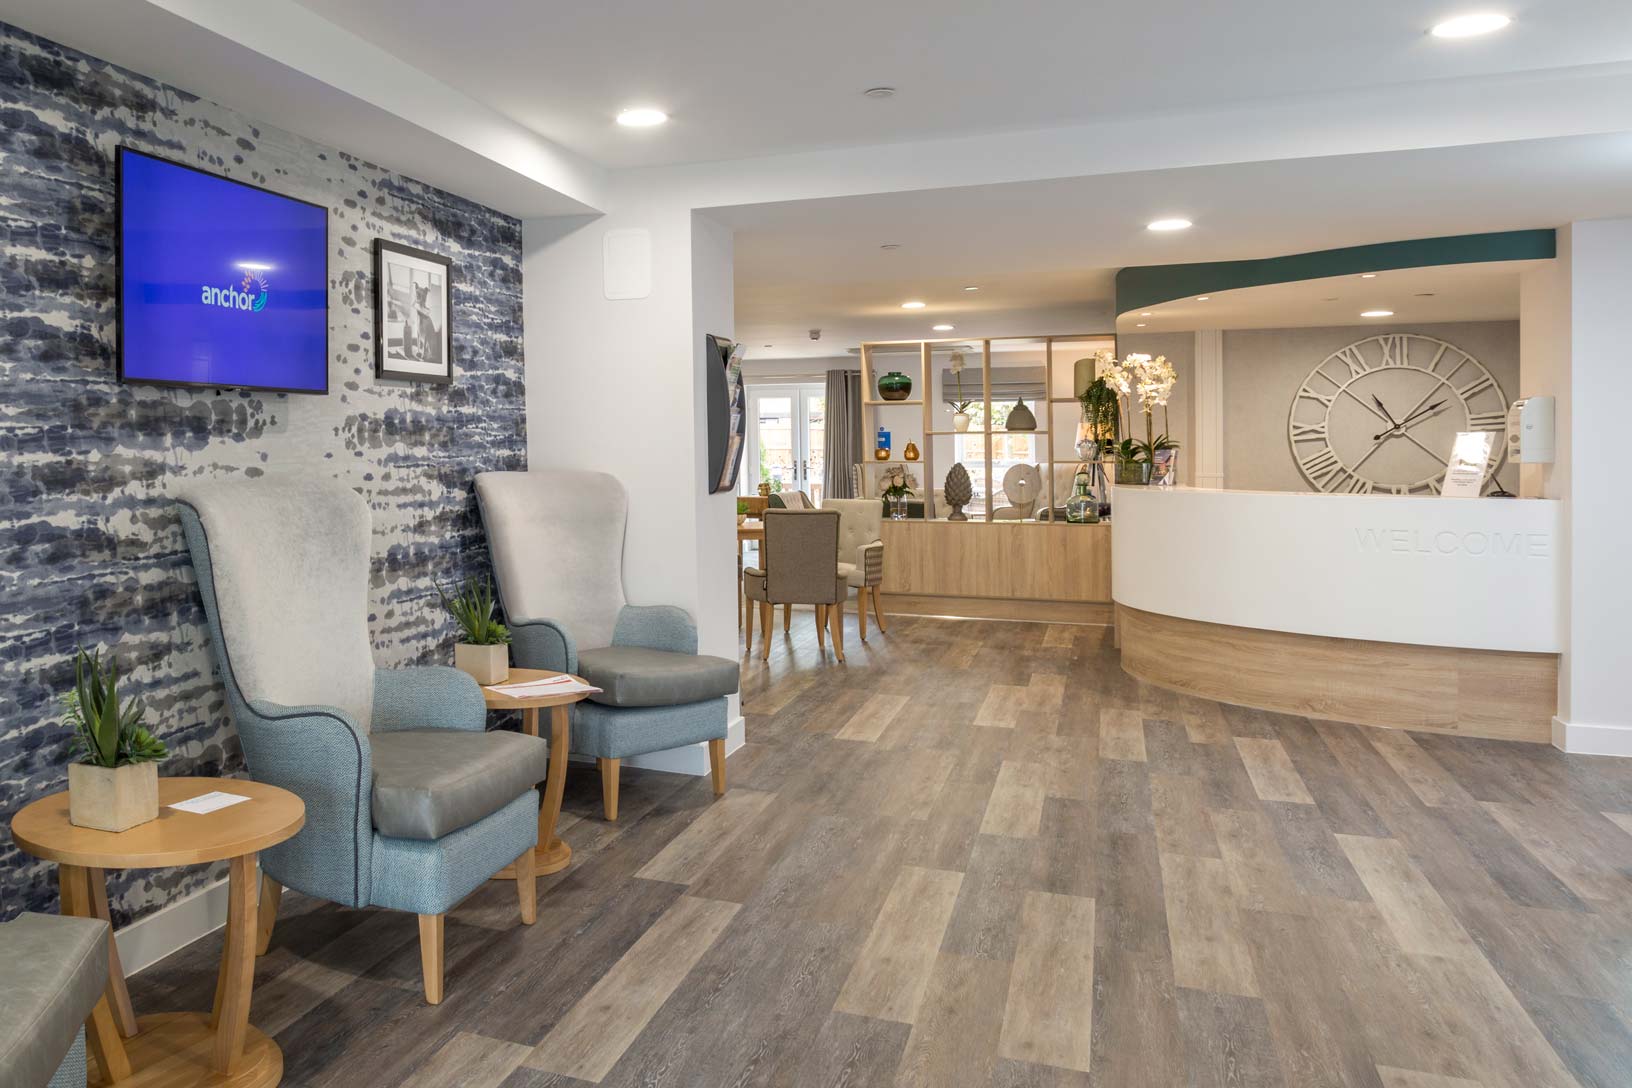 Modern reception area at The Dials featuring comfortable seating and friendly staff.